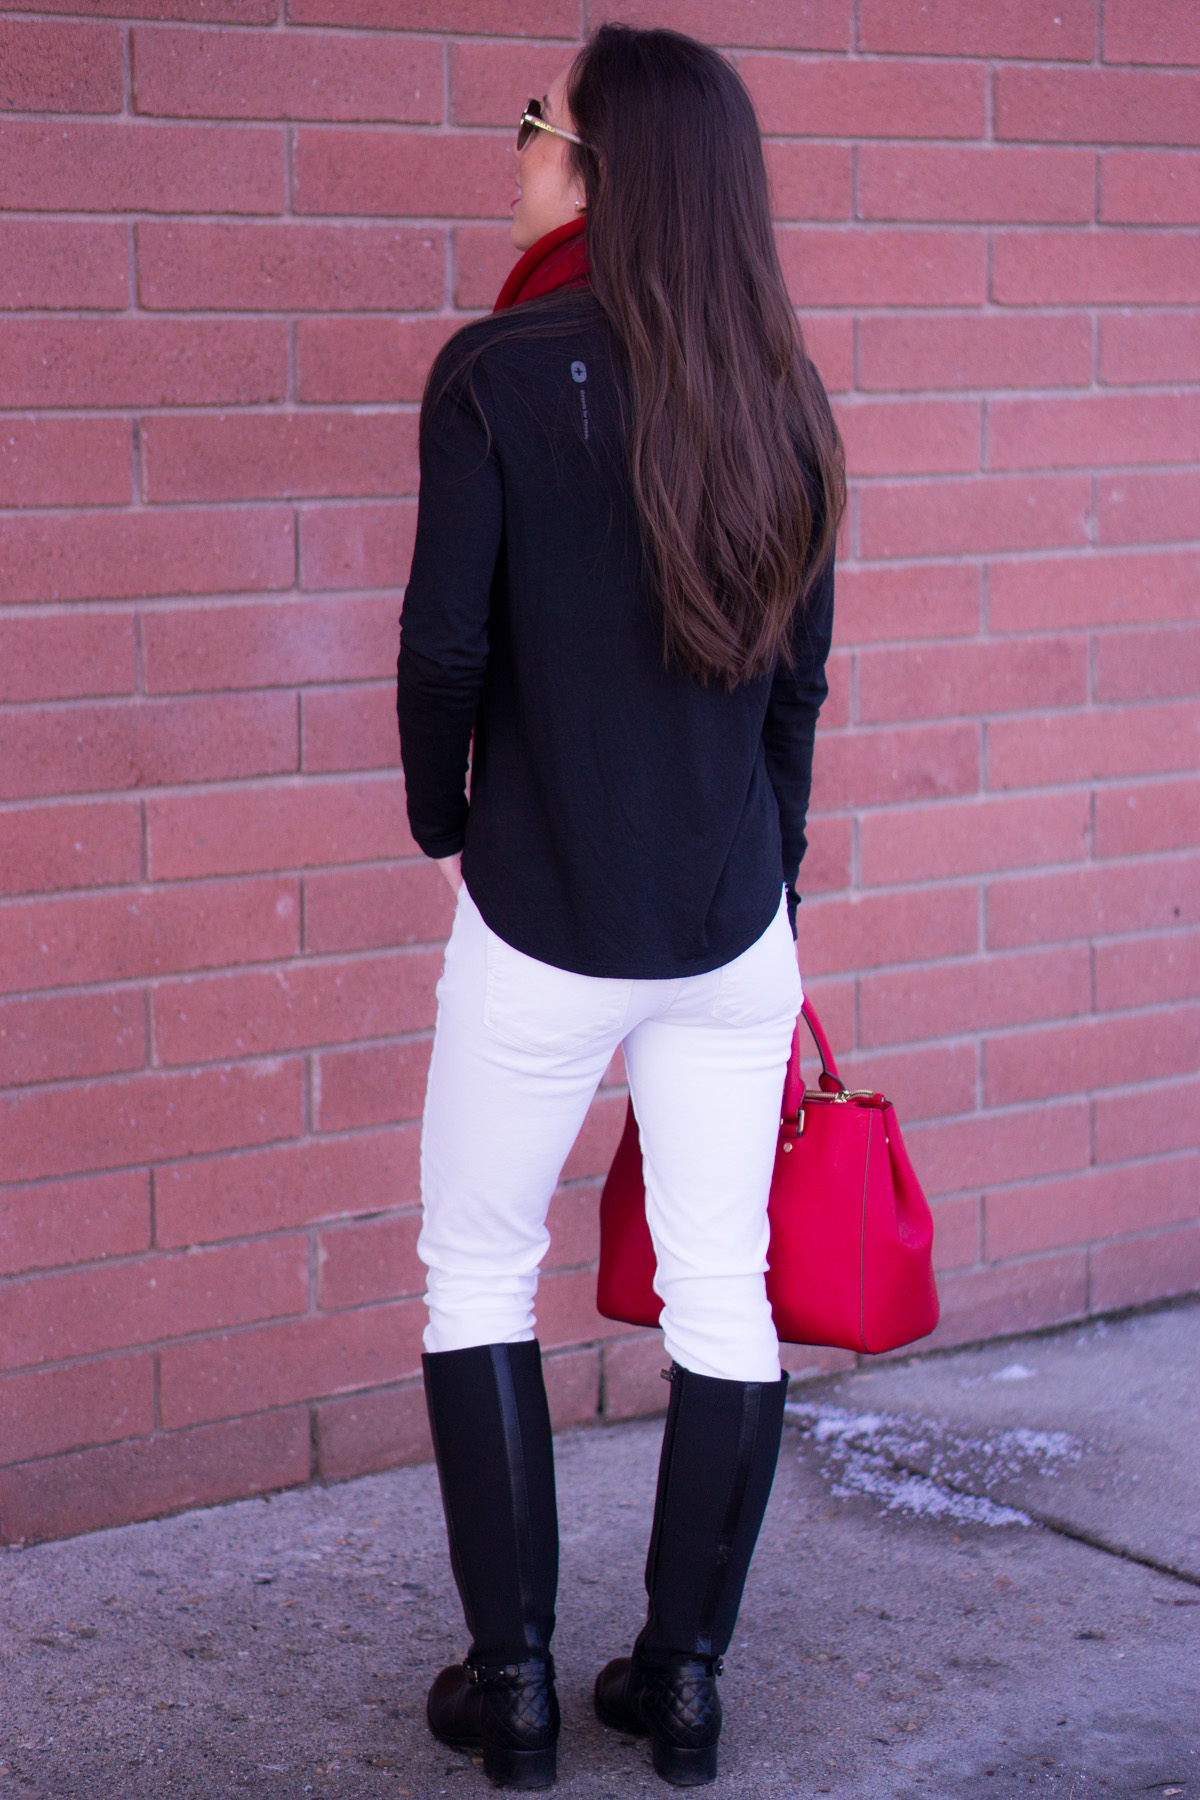 How to Transition into Spring with White Denim | Spring Outfit Ideas| Paige Petite White Denim Jeans | Aquatalia Boots | Talbots Belt | Krochet Kids Scarf